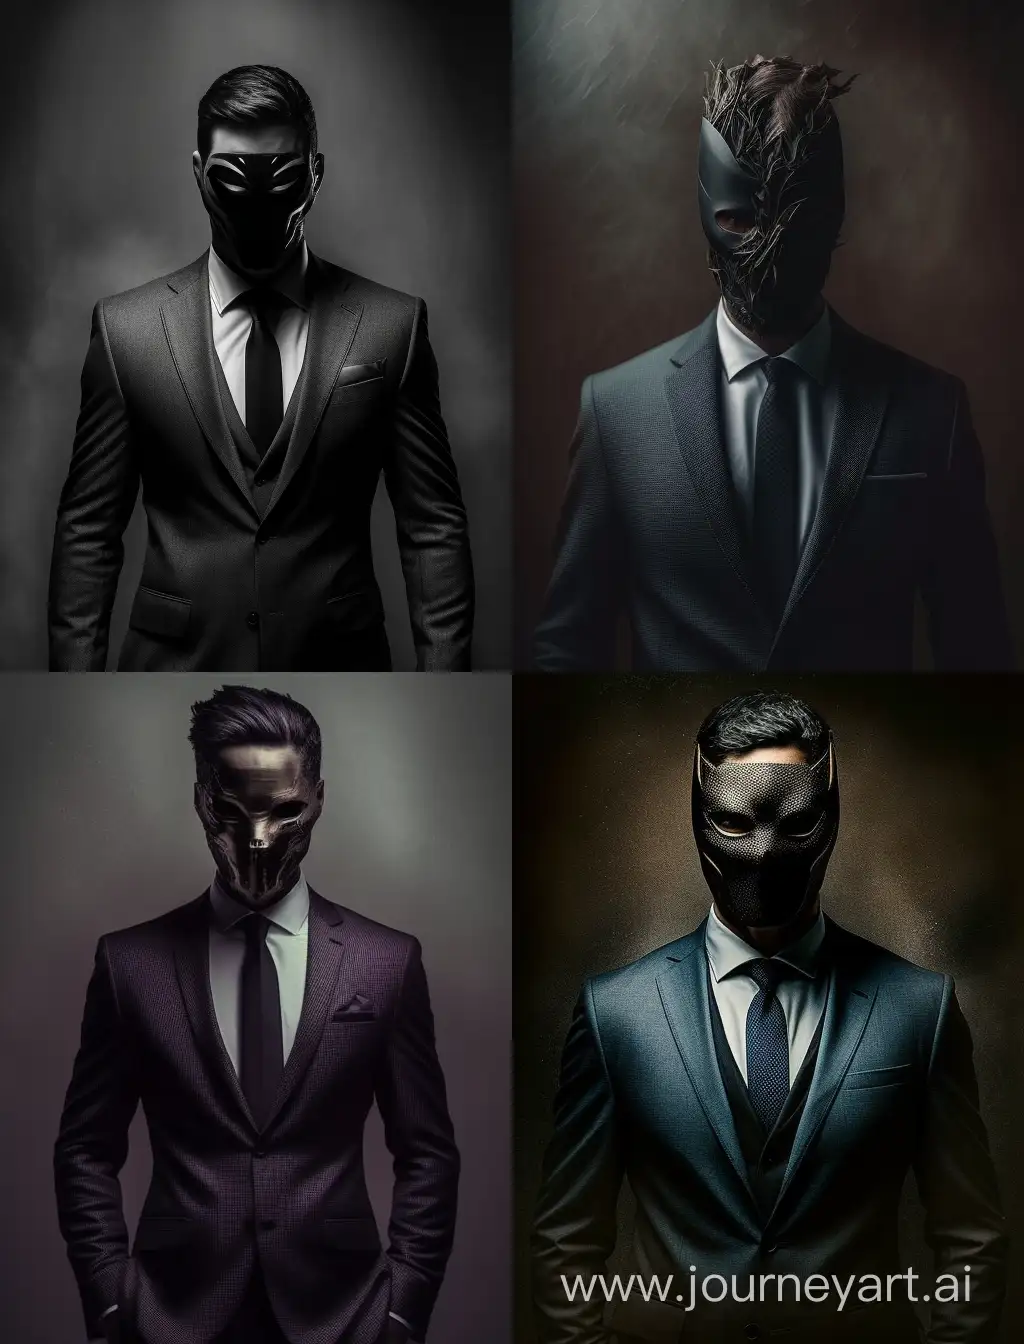 Create an image in which there will be a mysterious man with a black mask on his face and a beautiful suit covering his entire face, in a model pose.